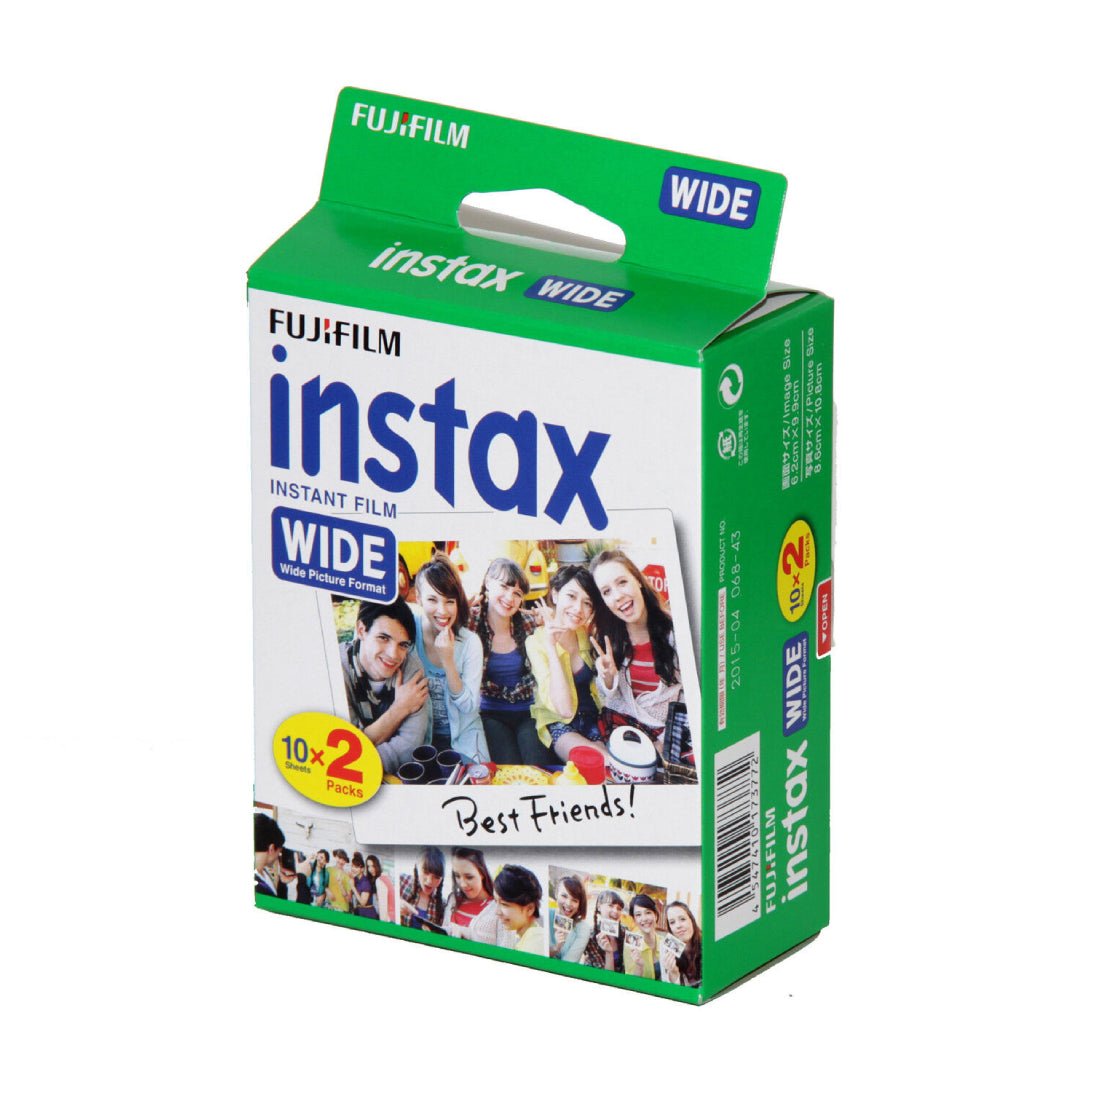 Fujifilm Instax Wide Film 2 Packs of 10 Sheets - أوراق طباعة - Store 974 | ستور ٩٧٤